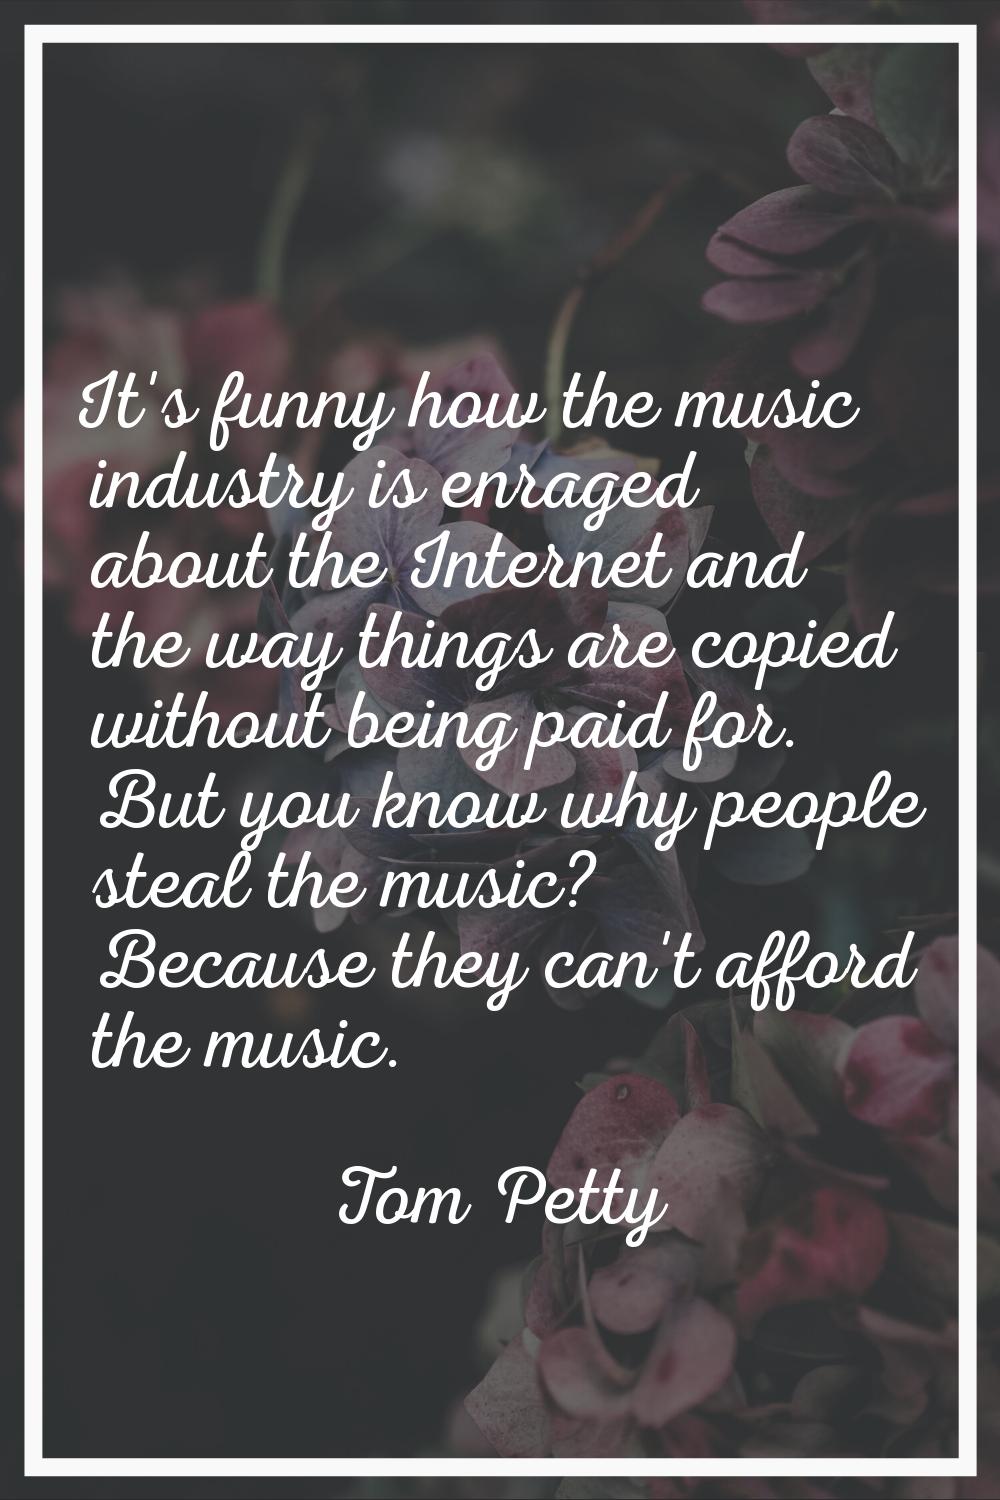 It's funny how the music industry is enraged about the Internet and the way things are copied witho